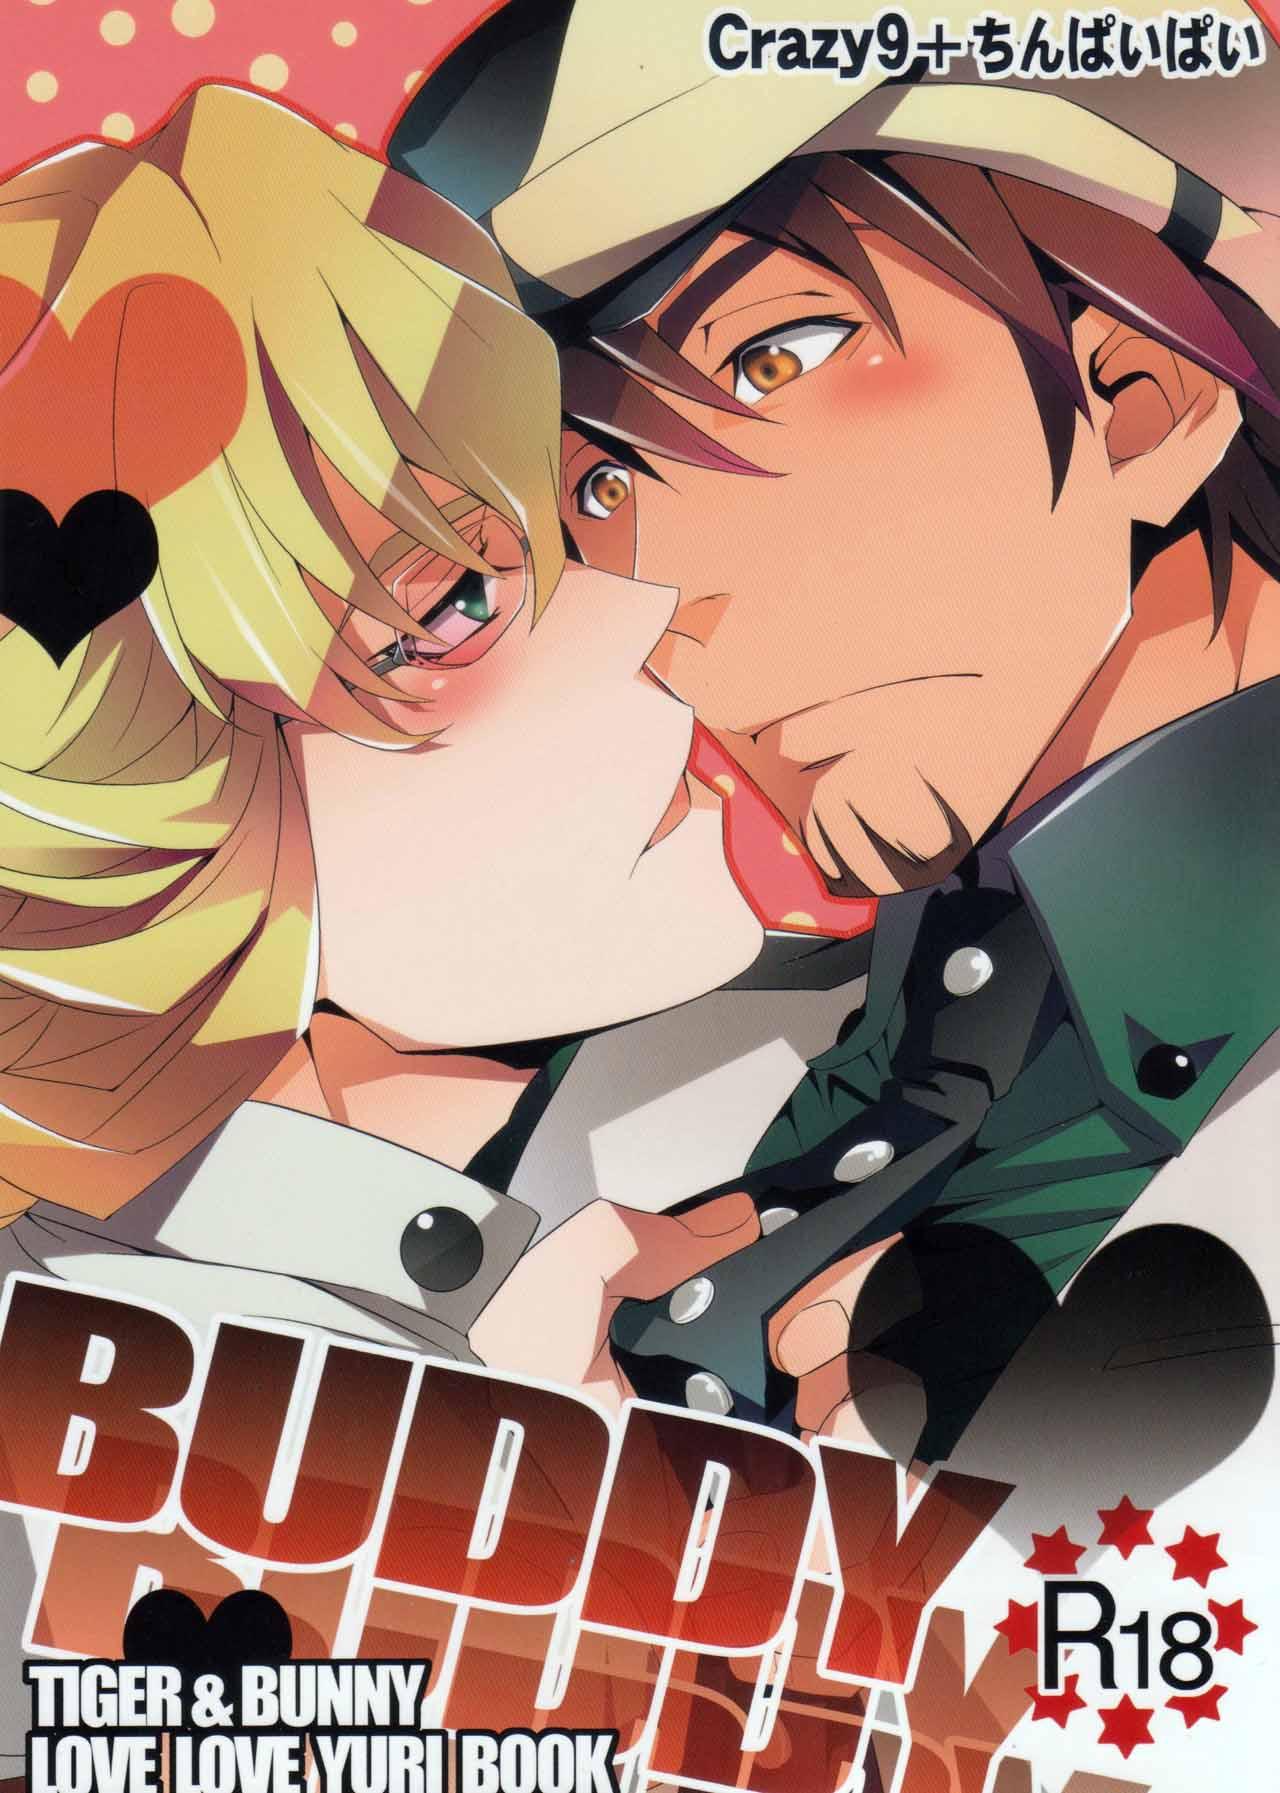 Butthole Buddy - Tiger and bunny Aussie - Page 2